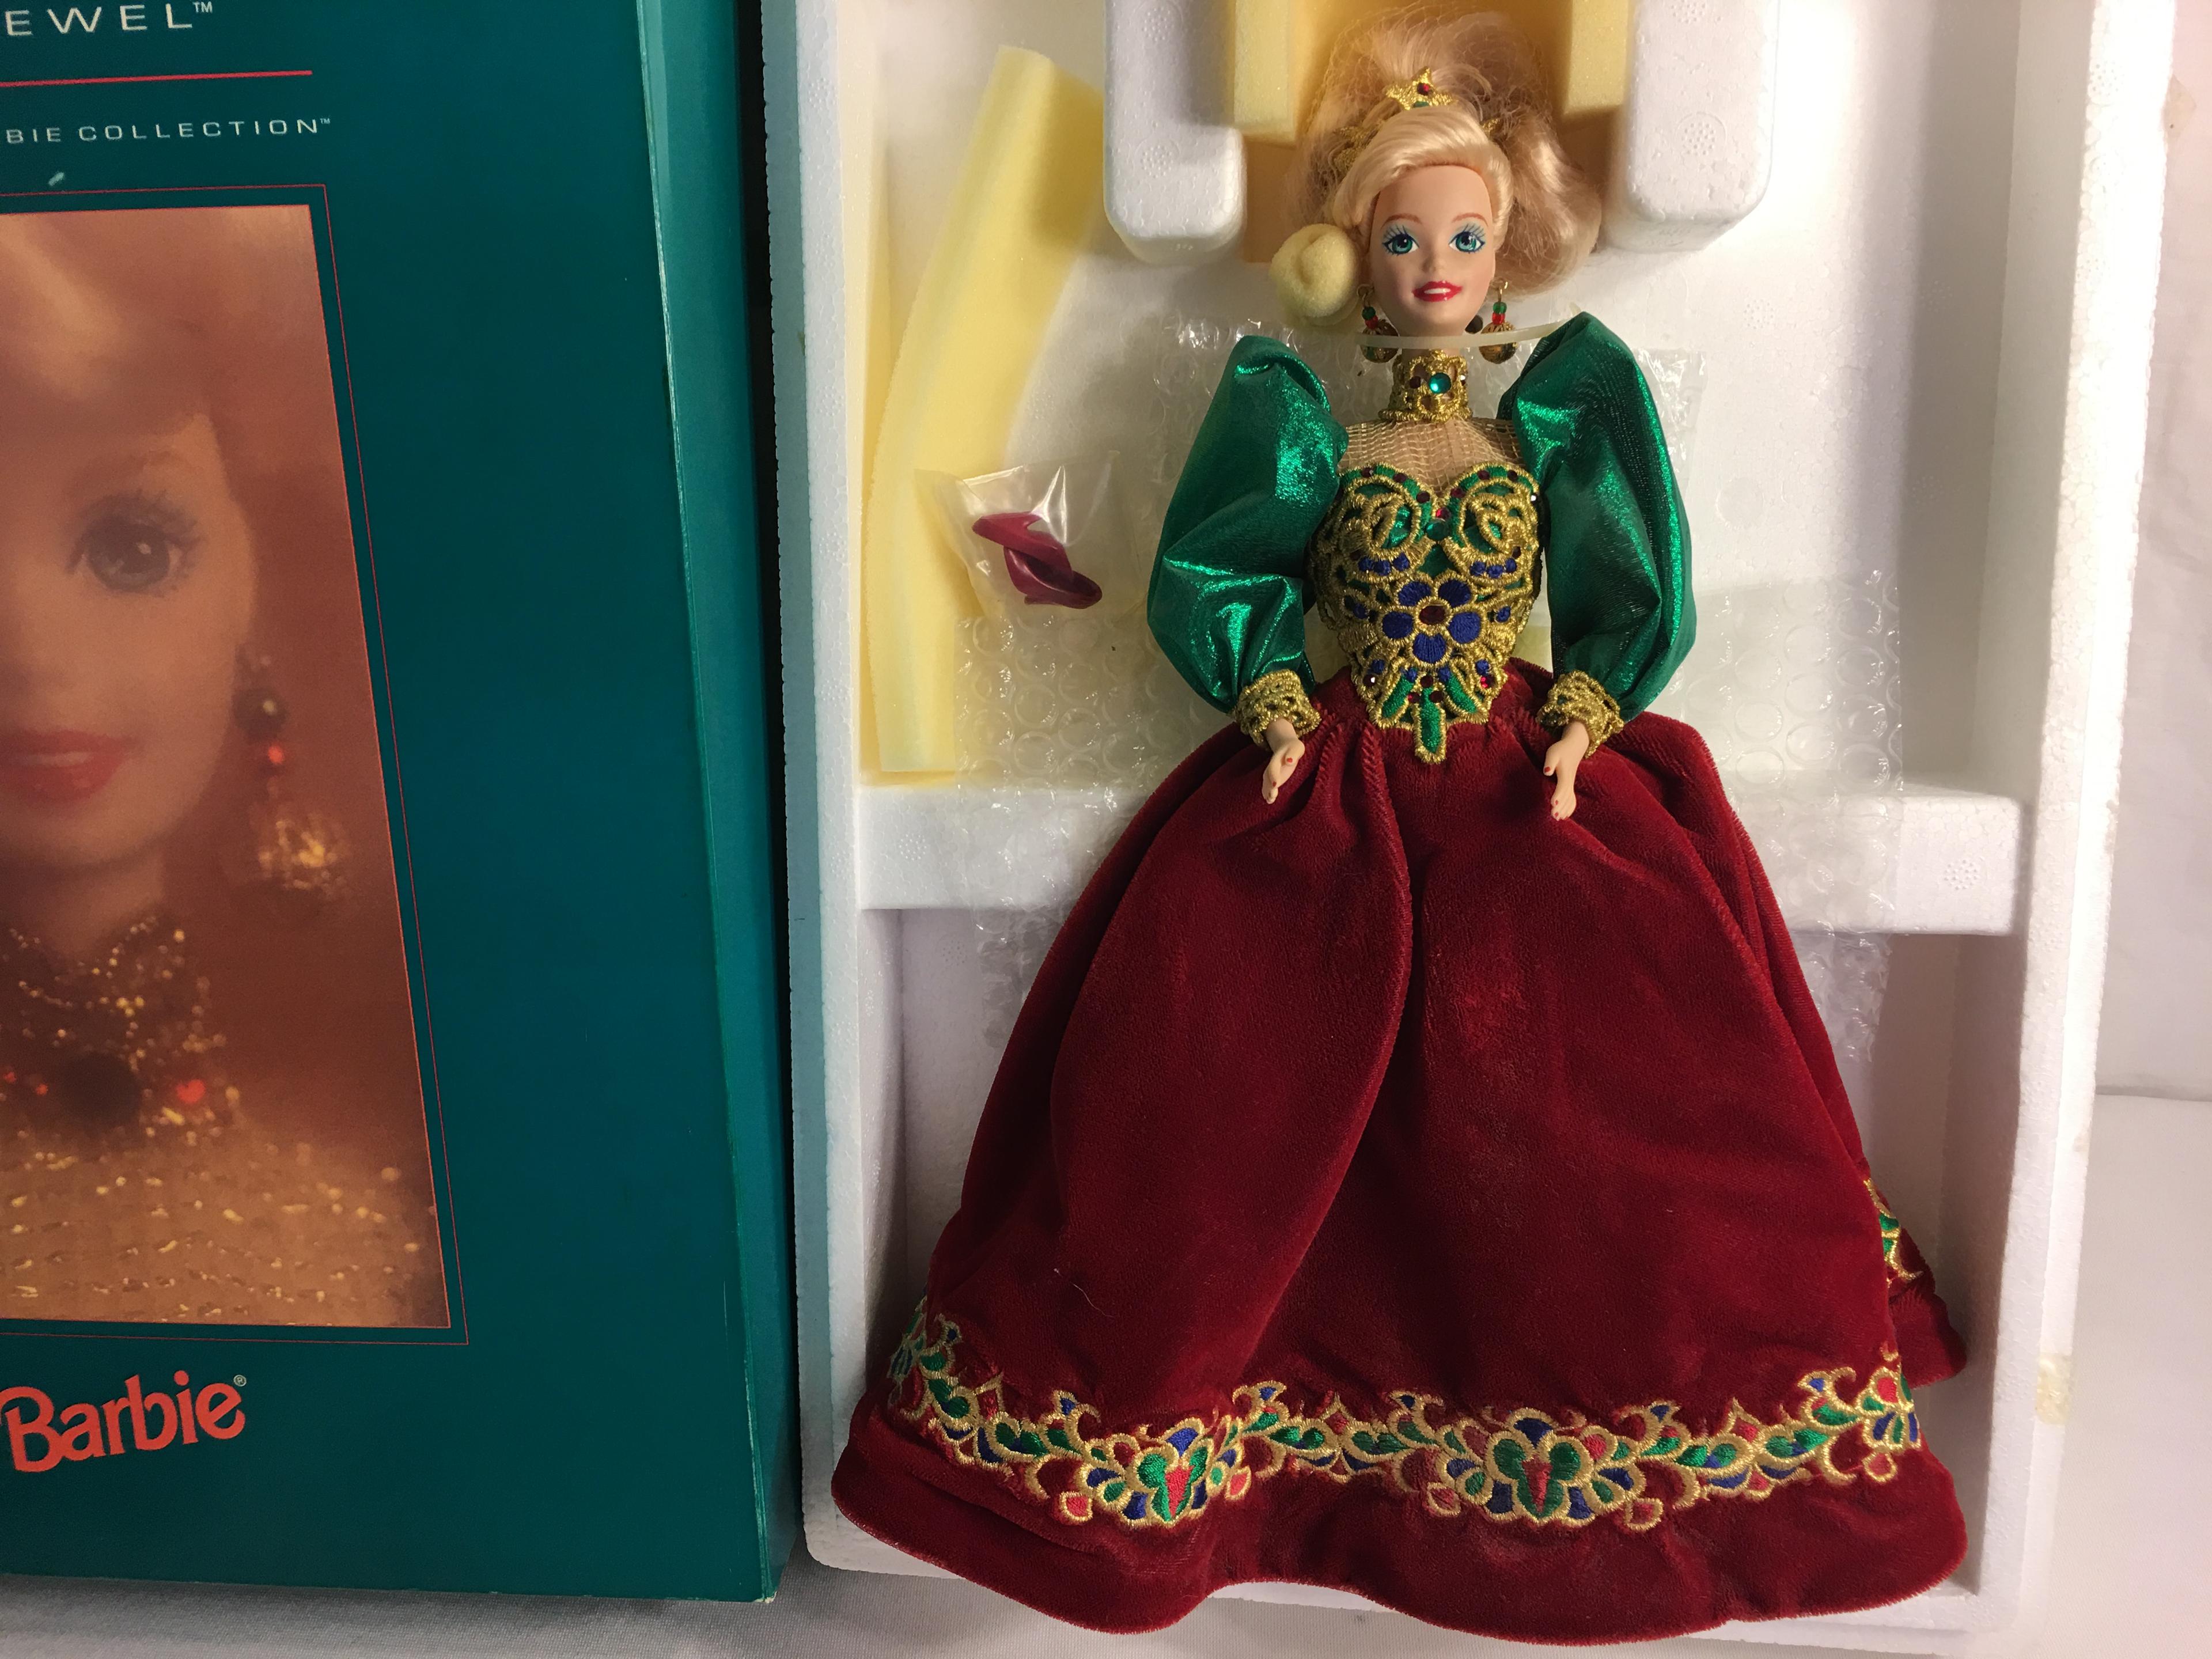 Collector Holiday Jewel Barbie Mattel Porcelain Barbie Collection Doll Box has Damage 16"tall Box